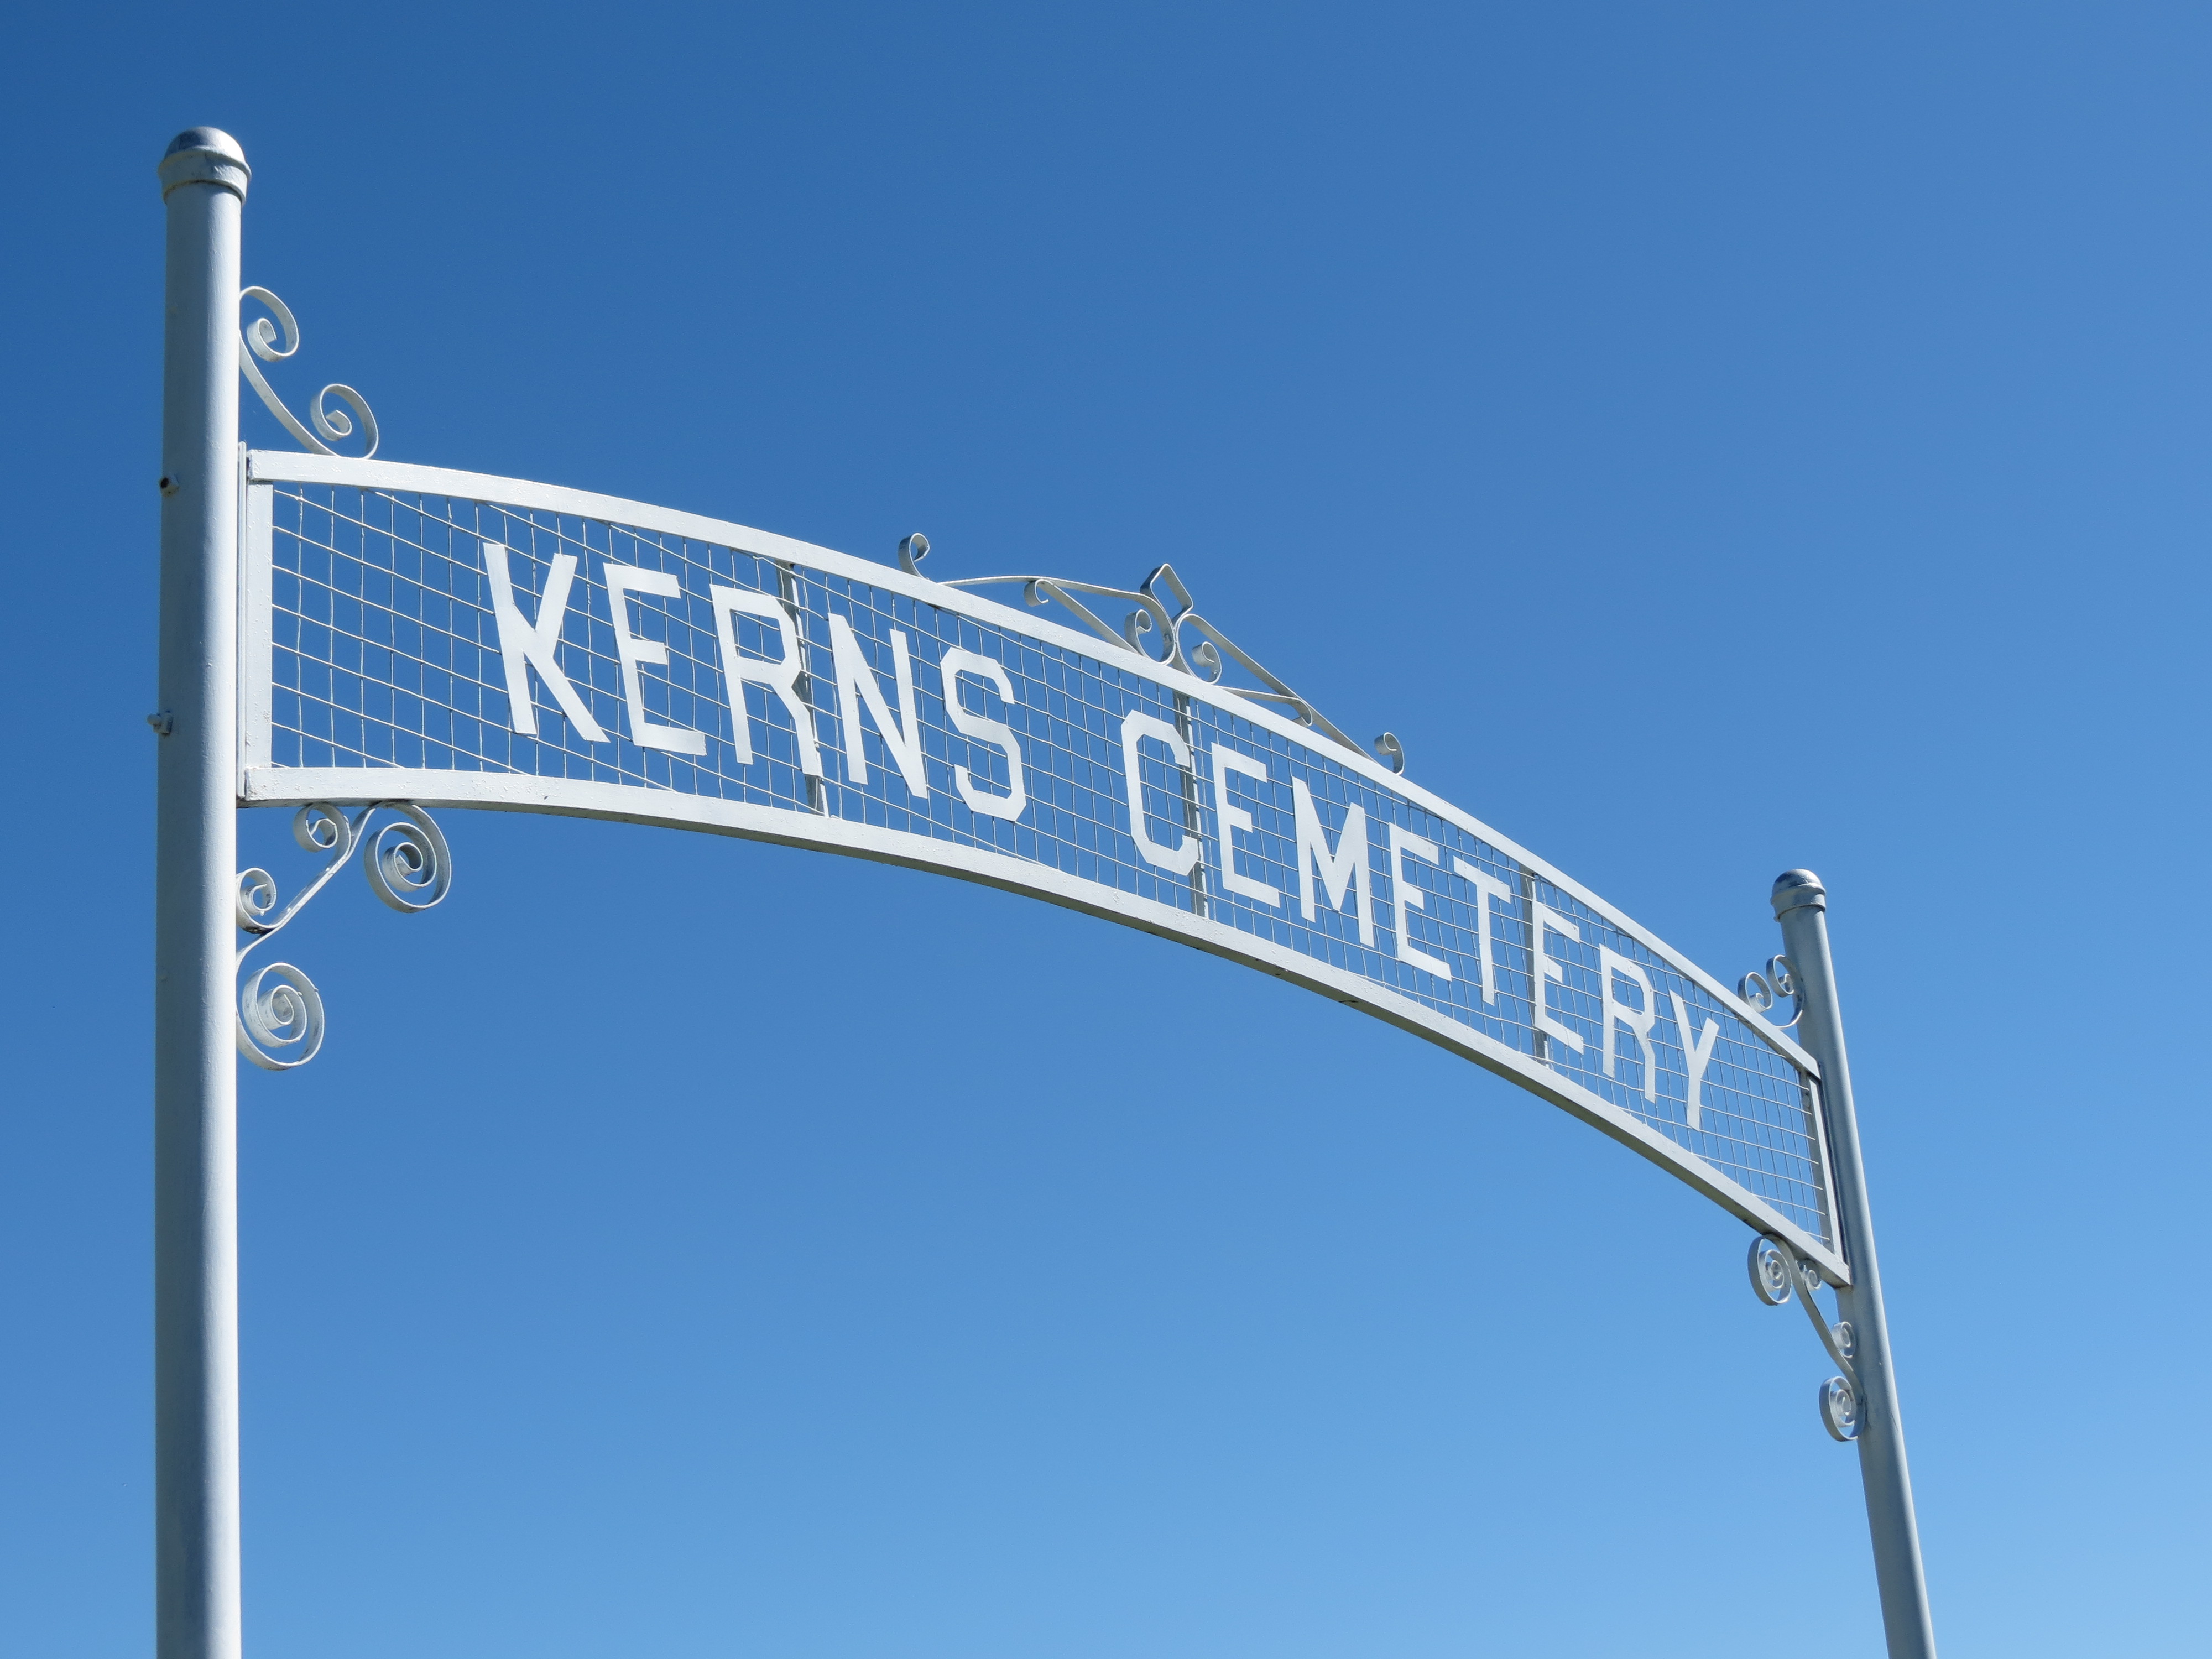  A tall white metal gateway that says "Kerns Cemetery", in front of a dusky blue sky.